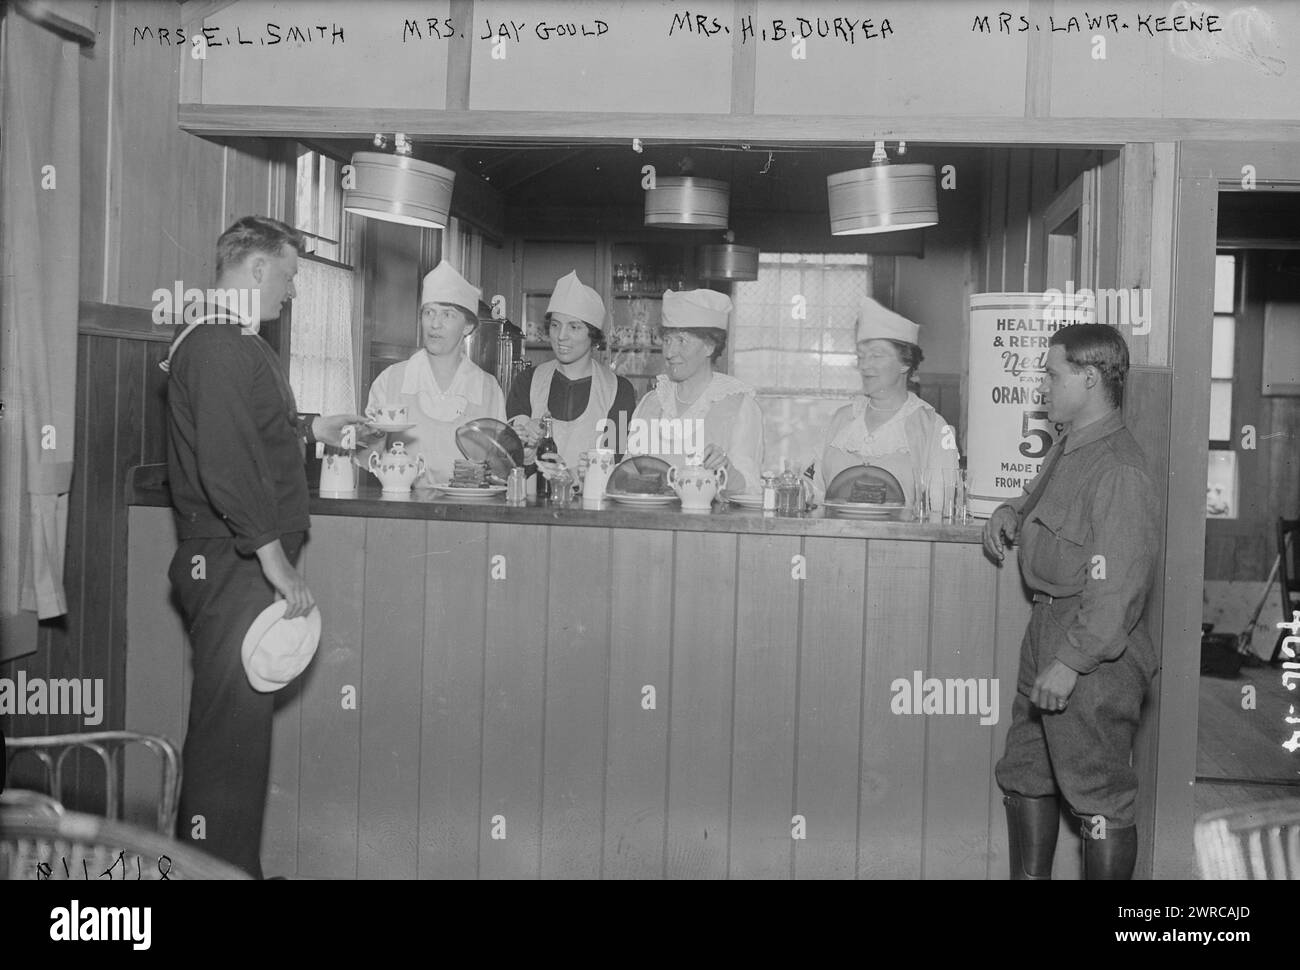 Mrs. E.L. Smith, Mrs. Jay Gould, Mrs. H.B. Duryea, Mrs. Lawr. Keene, Photograph shows Mrs. Edward L. Smith, Mrs. Jay Gould, Mrs. Herman B. Duryea (Ellen Homer Winchester), and Mrs. Lawrence Keene behind a counter, serving military personnel at the Y.M.C.A. Bryant Park Eagle Hut, New York City which was opened during World War I., 1918, World War, 1914-1918, Glass negatives, 1 negative: glass Stock Photo